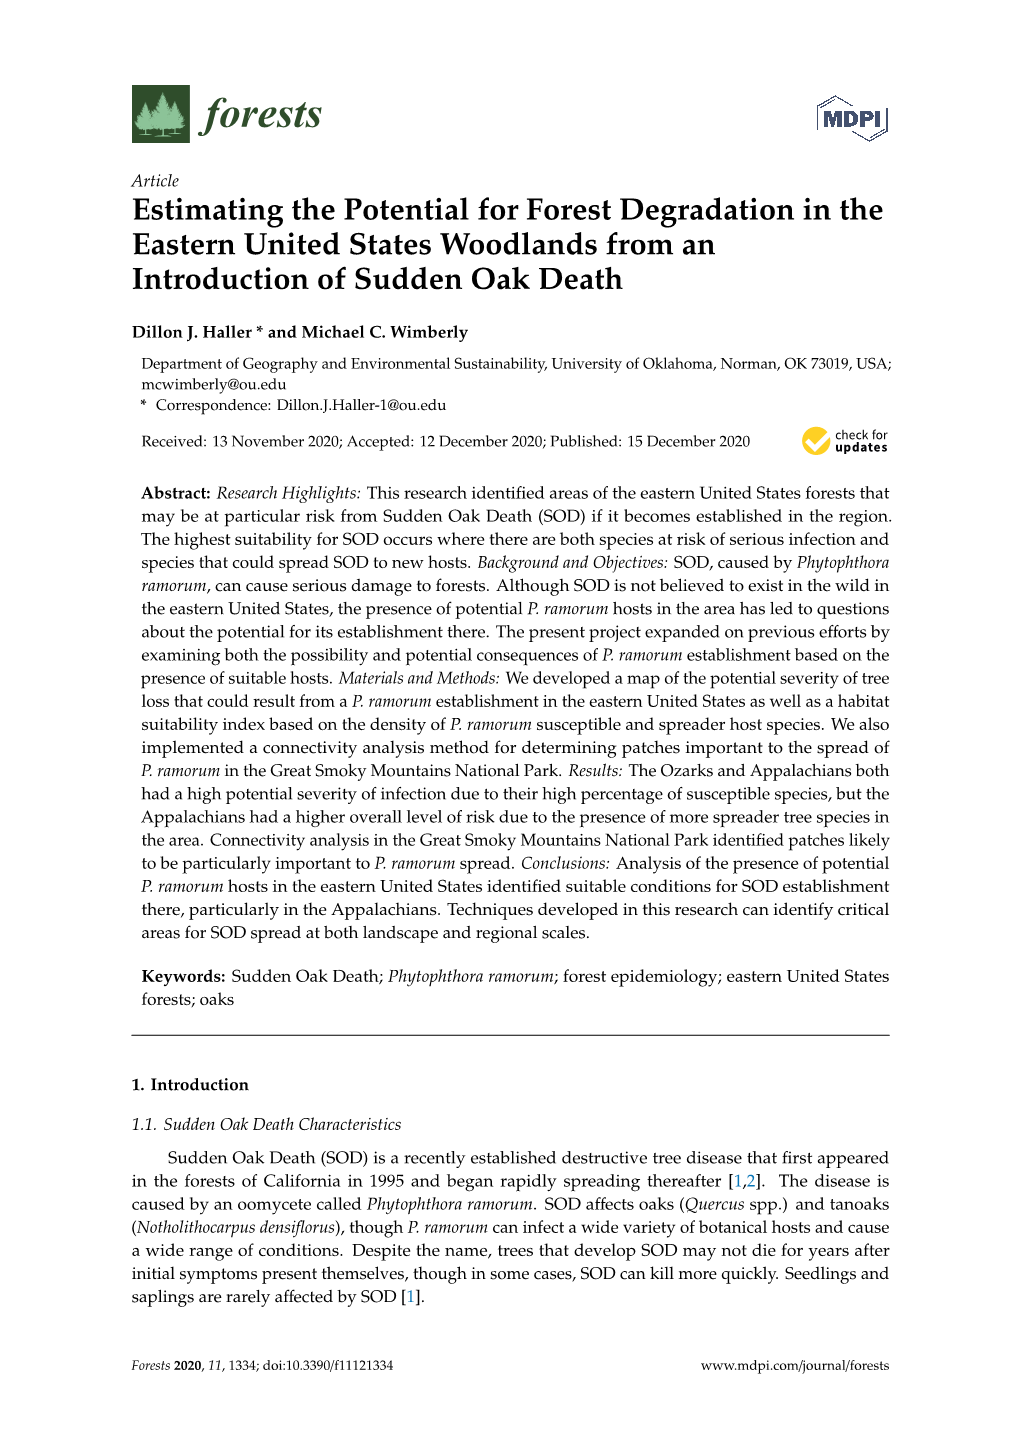 Estimating the Potential for Forest Degradation in the Eastern United States Woodlands from an Introduction of Sudden Oak Death